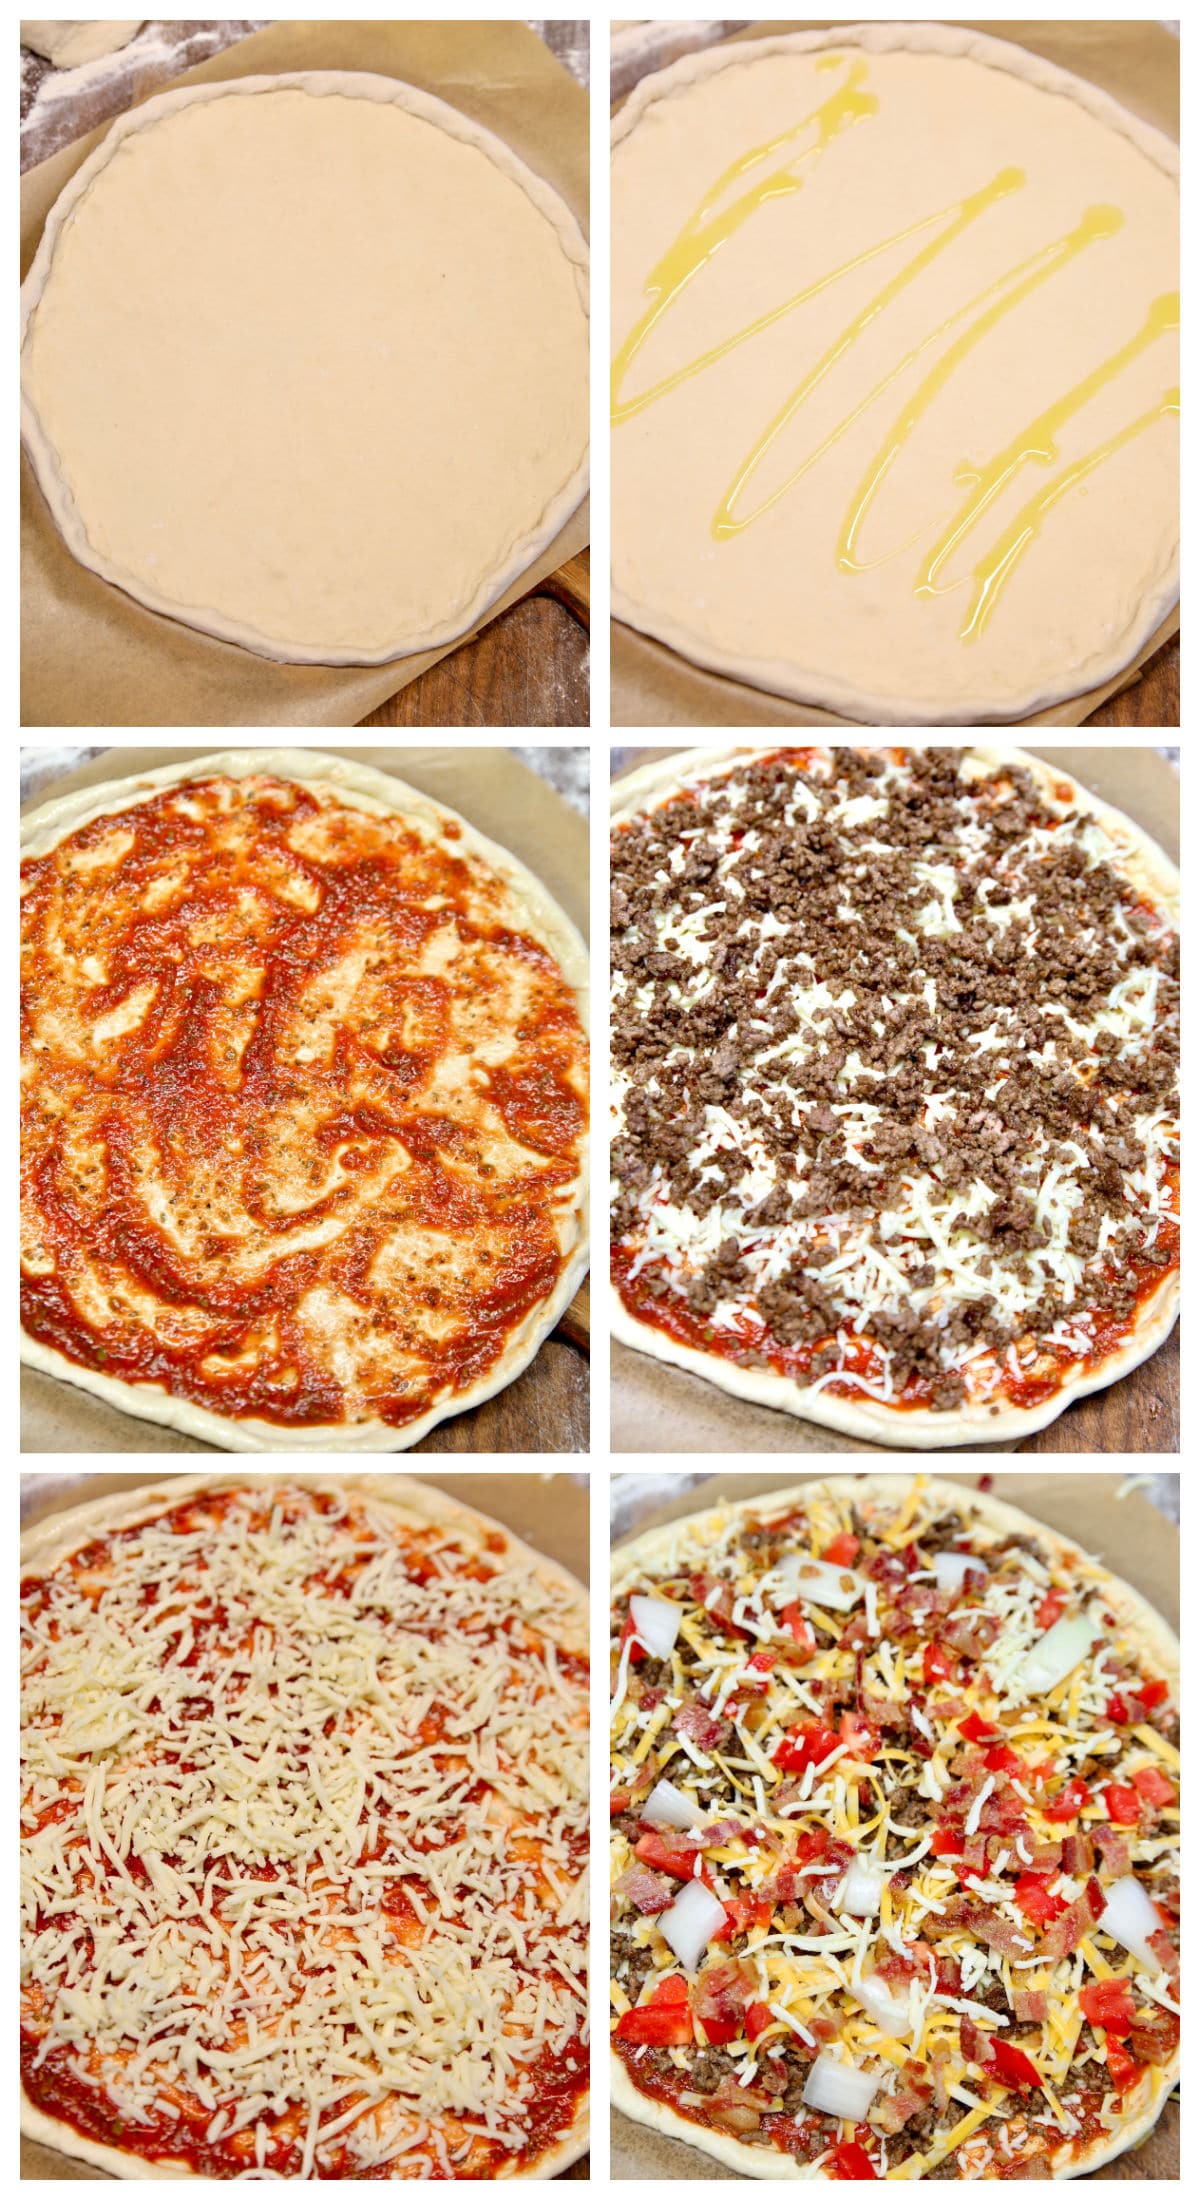 Collage making bacon cheeseburger pizza.